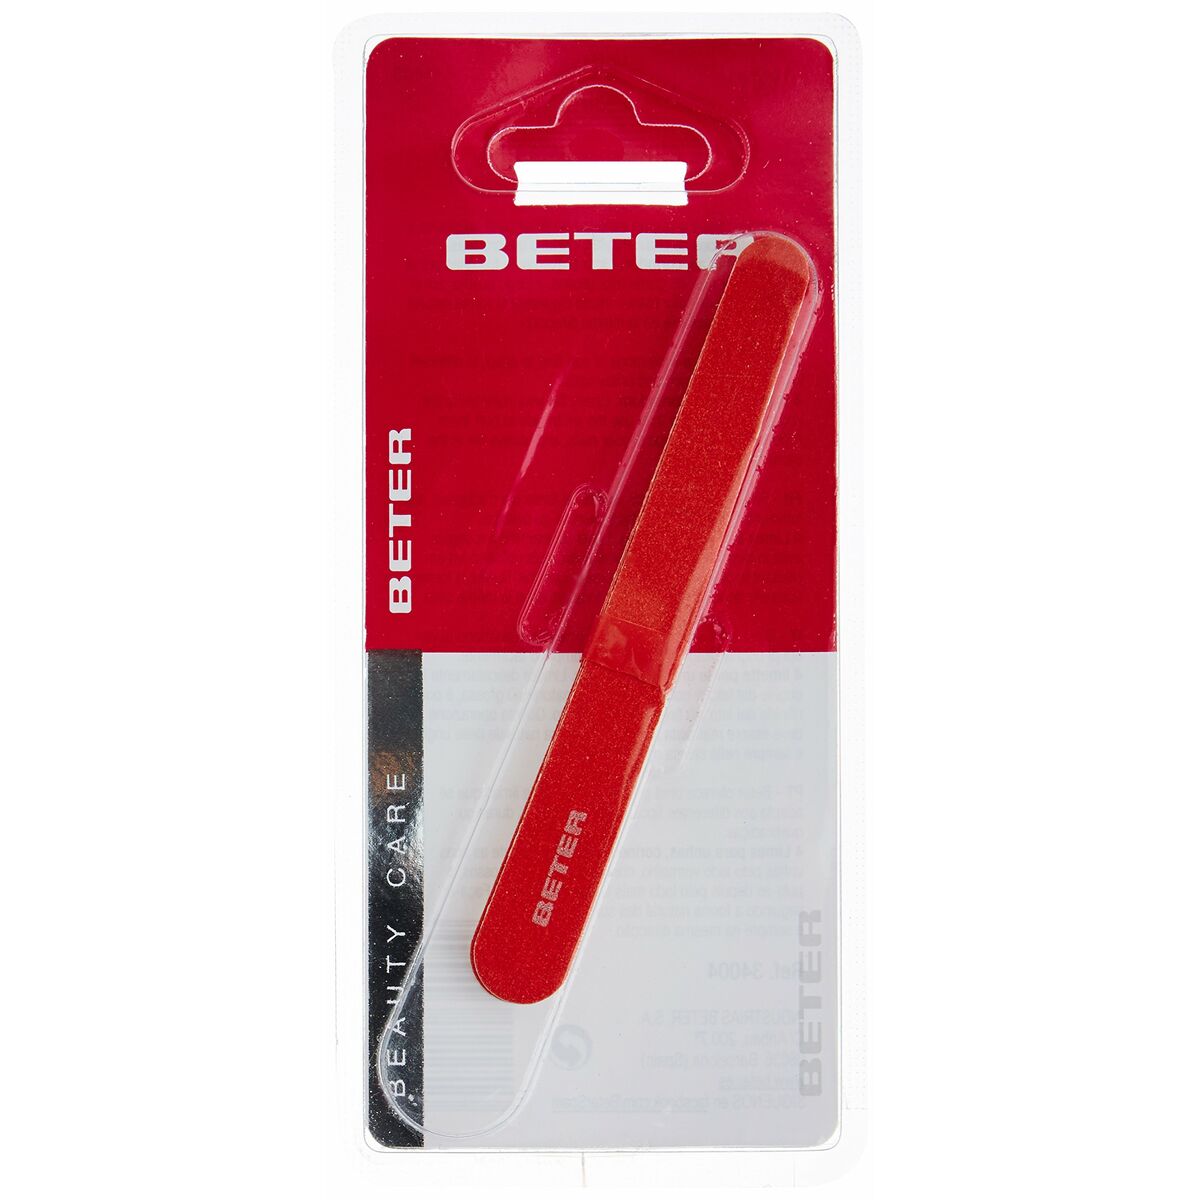 Nail file Beter Lima 4 Pieces - Calm Beauty IE